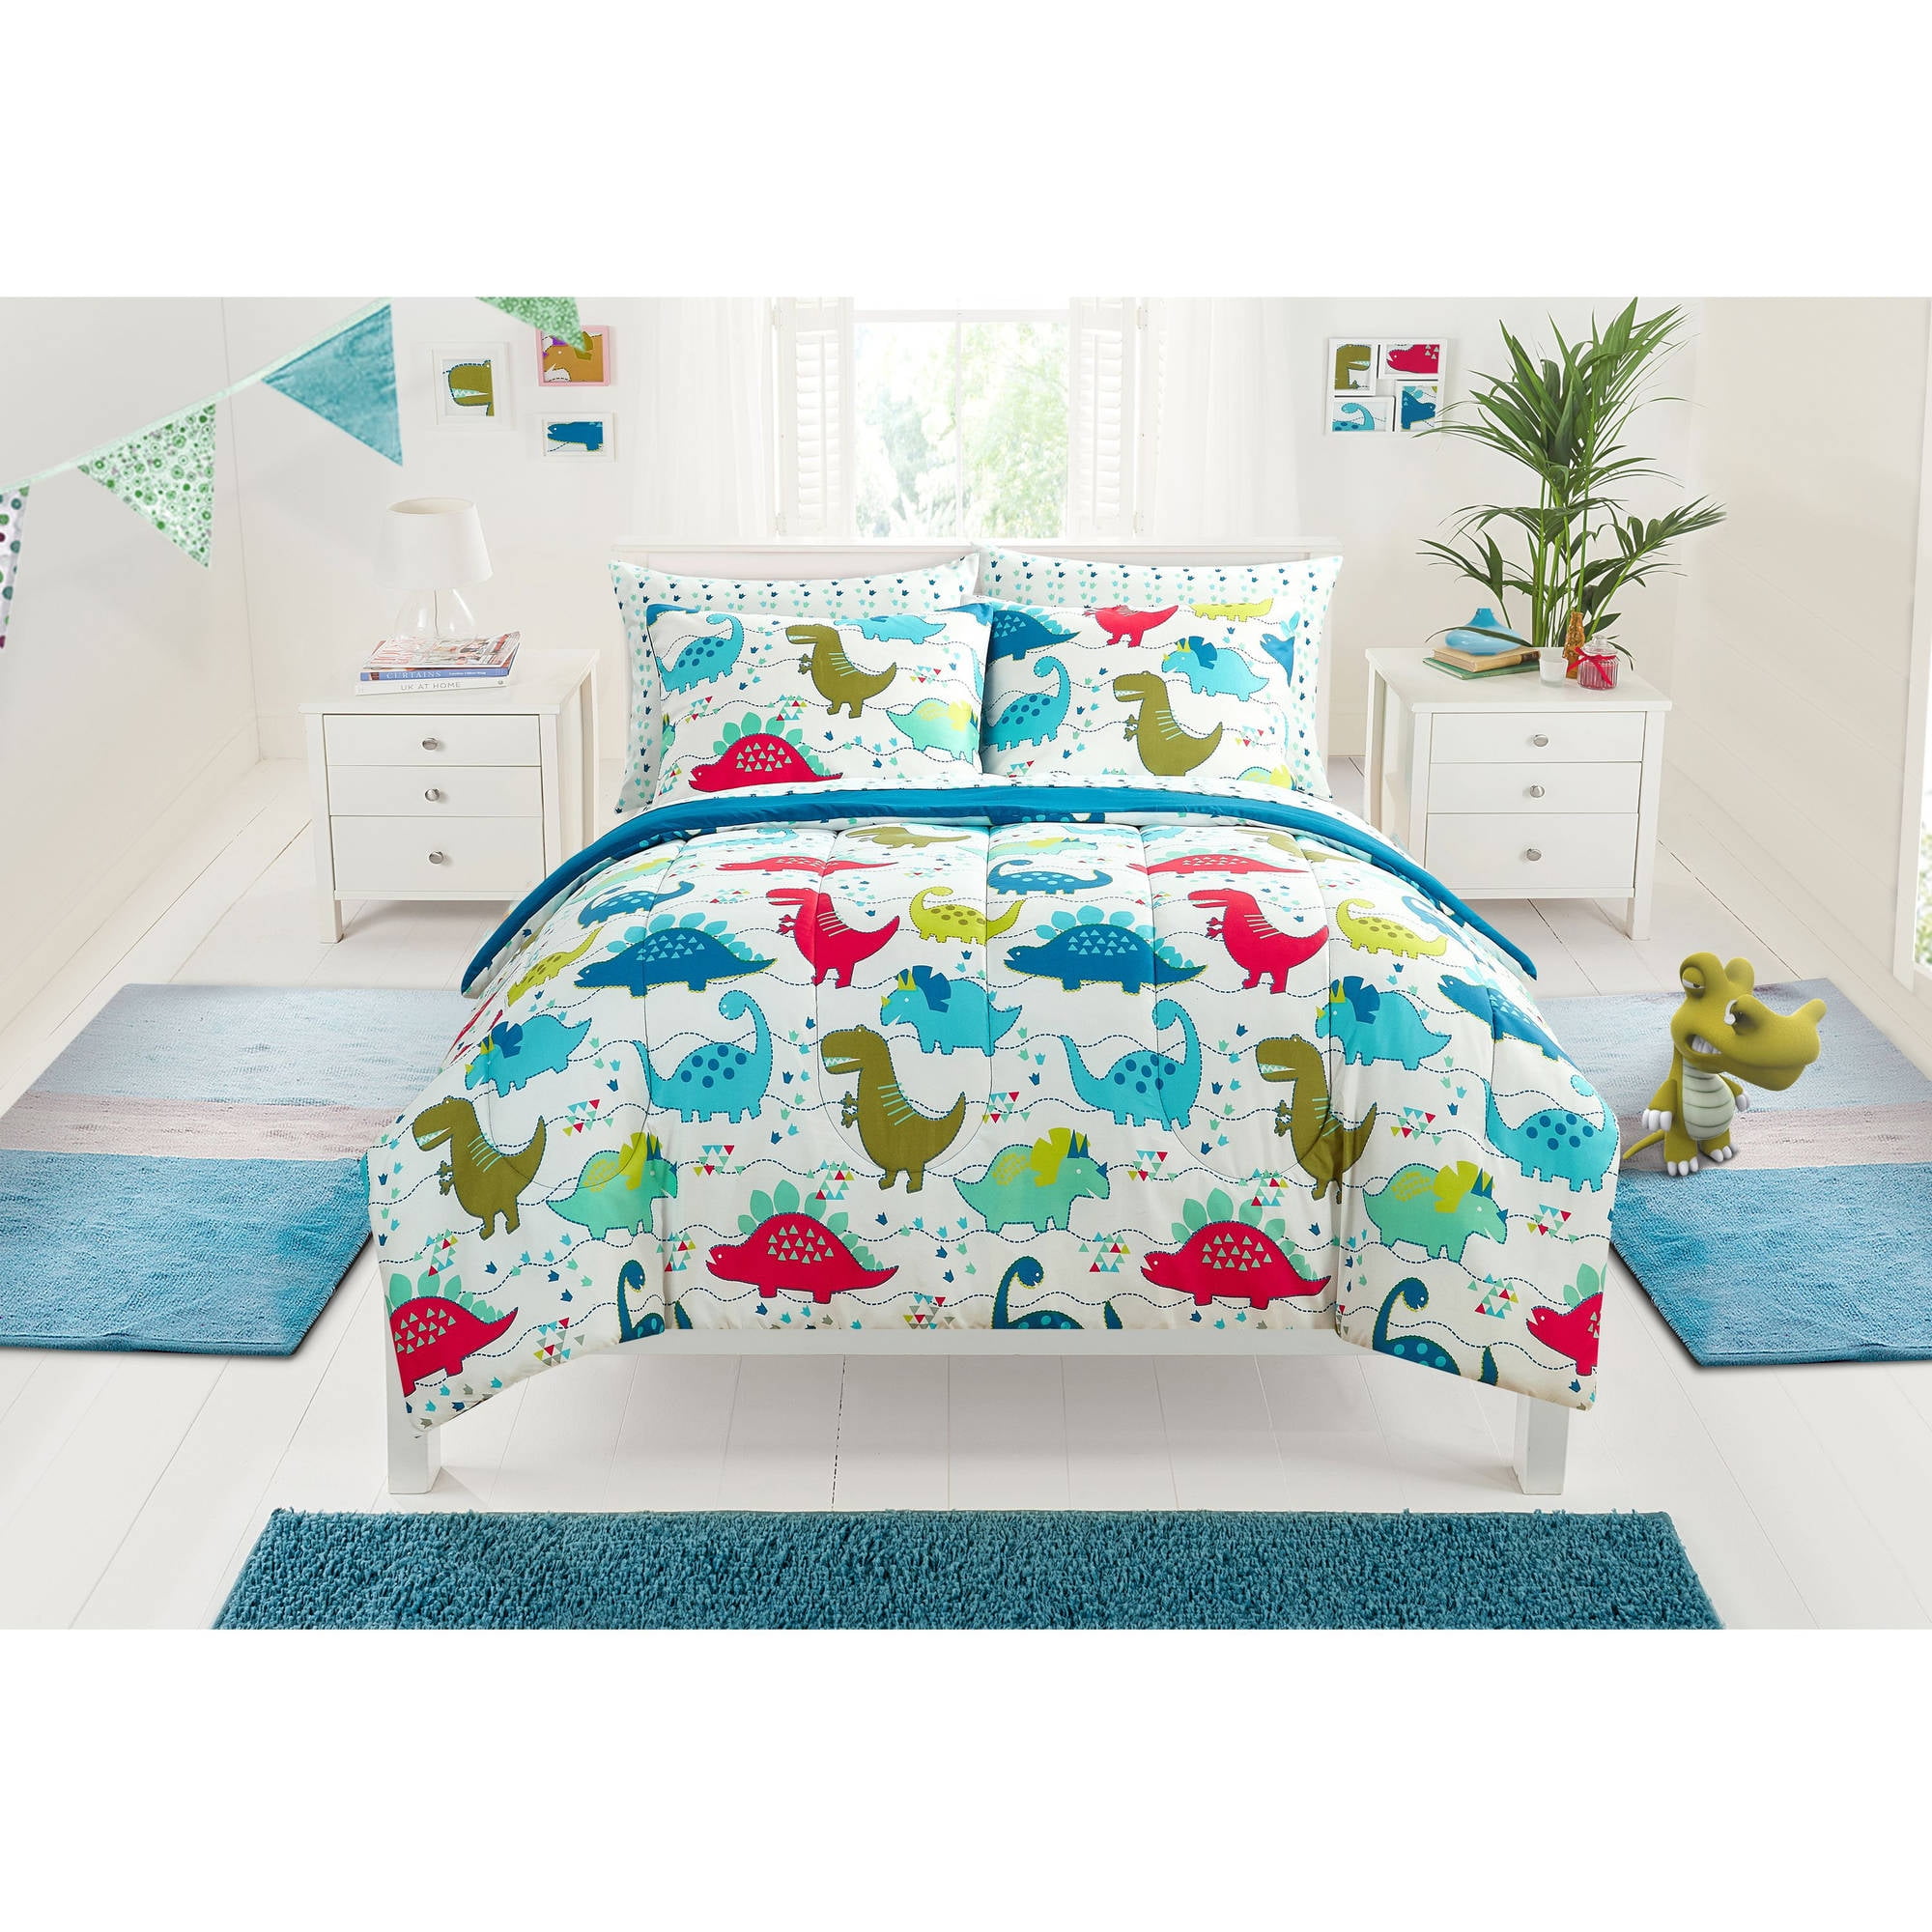 Queen Size Comforter Set Sheets Bed in a Bag Kid's New Boy's Dinosaur Full 